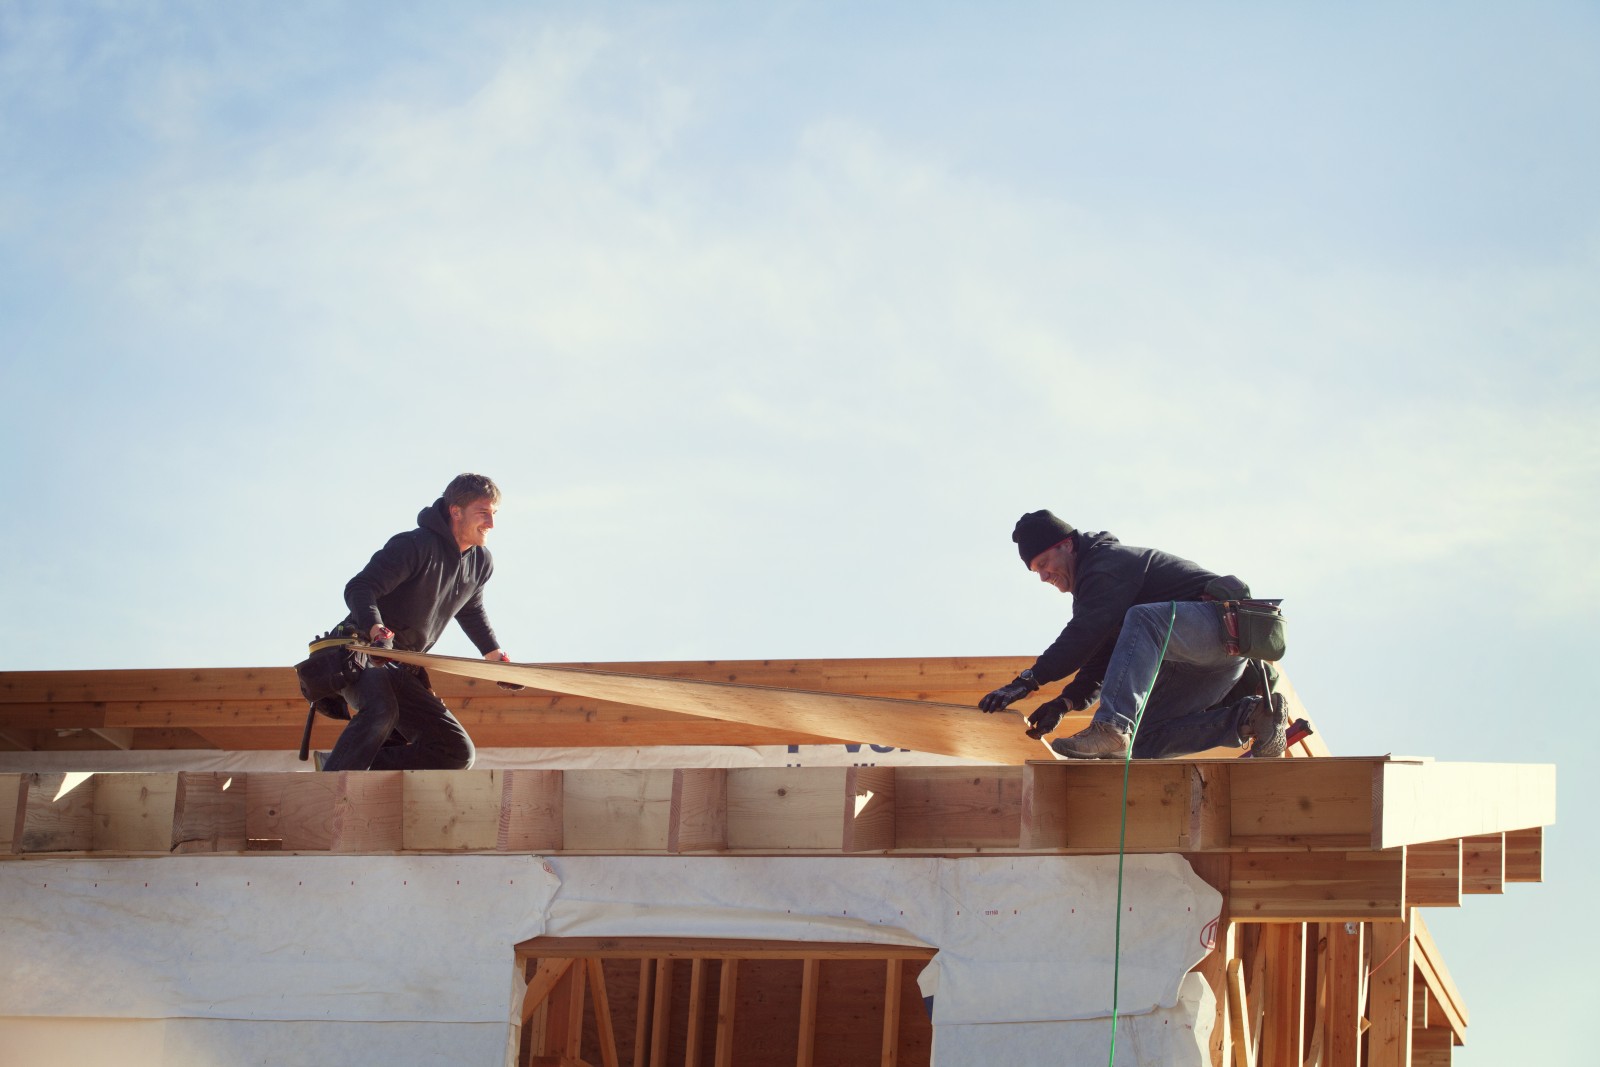 workers building a home